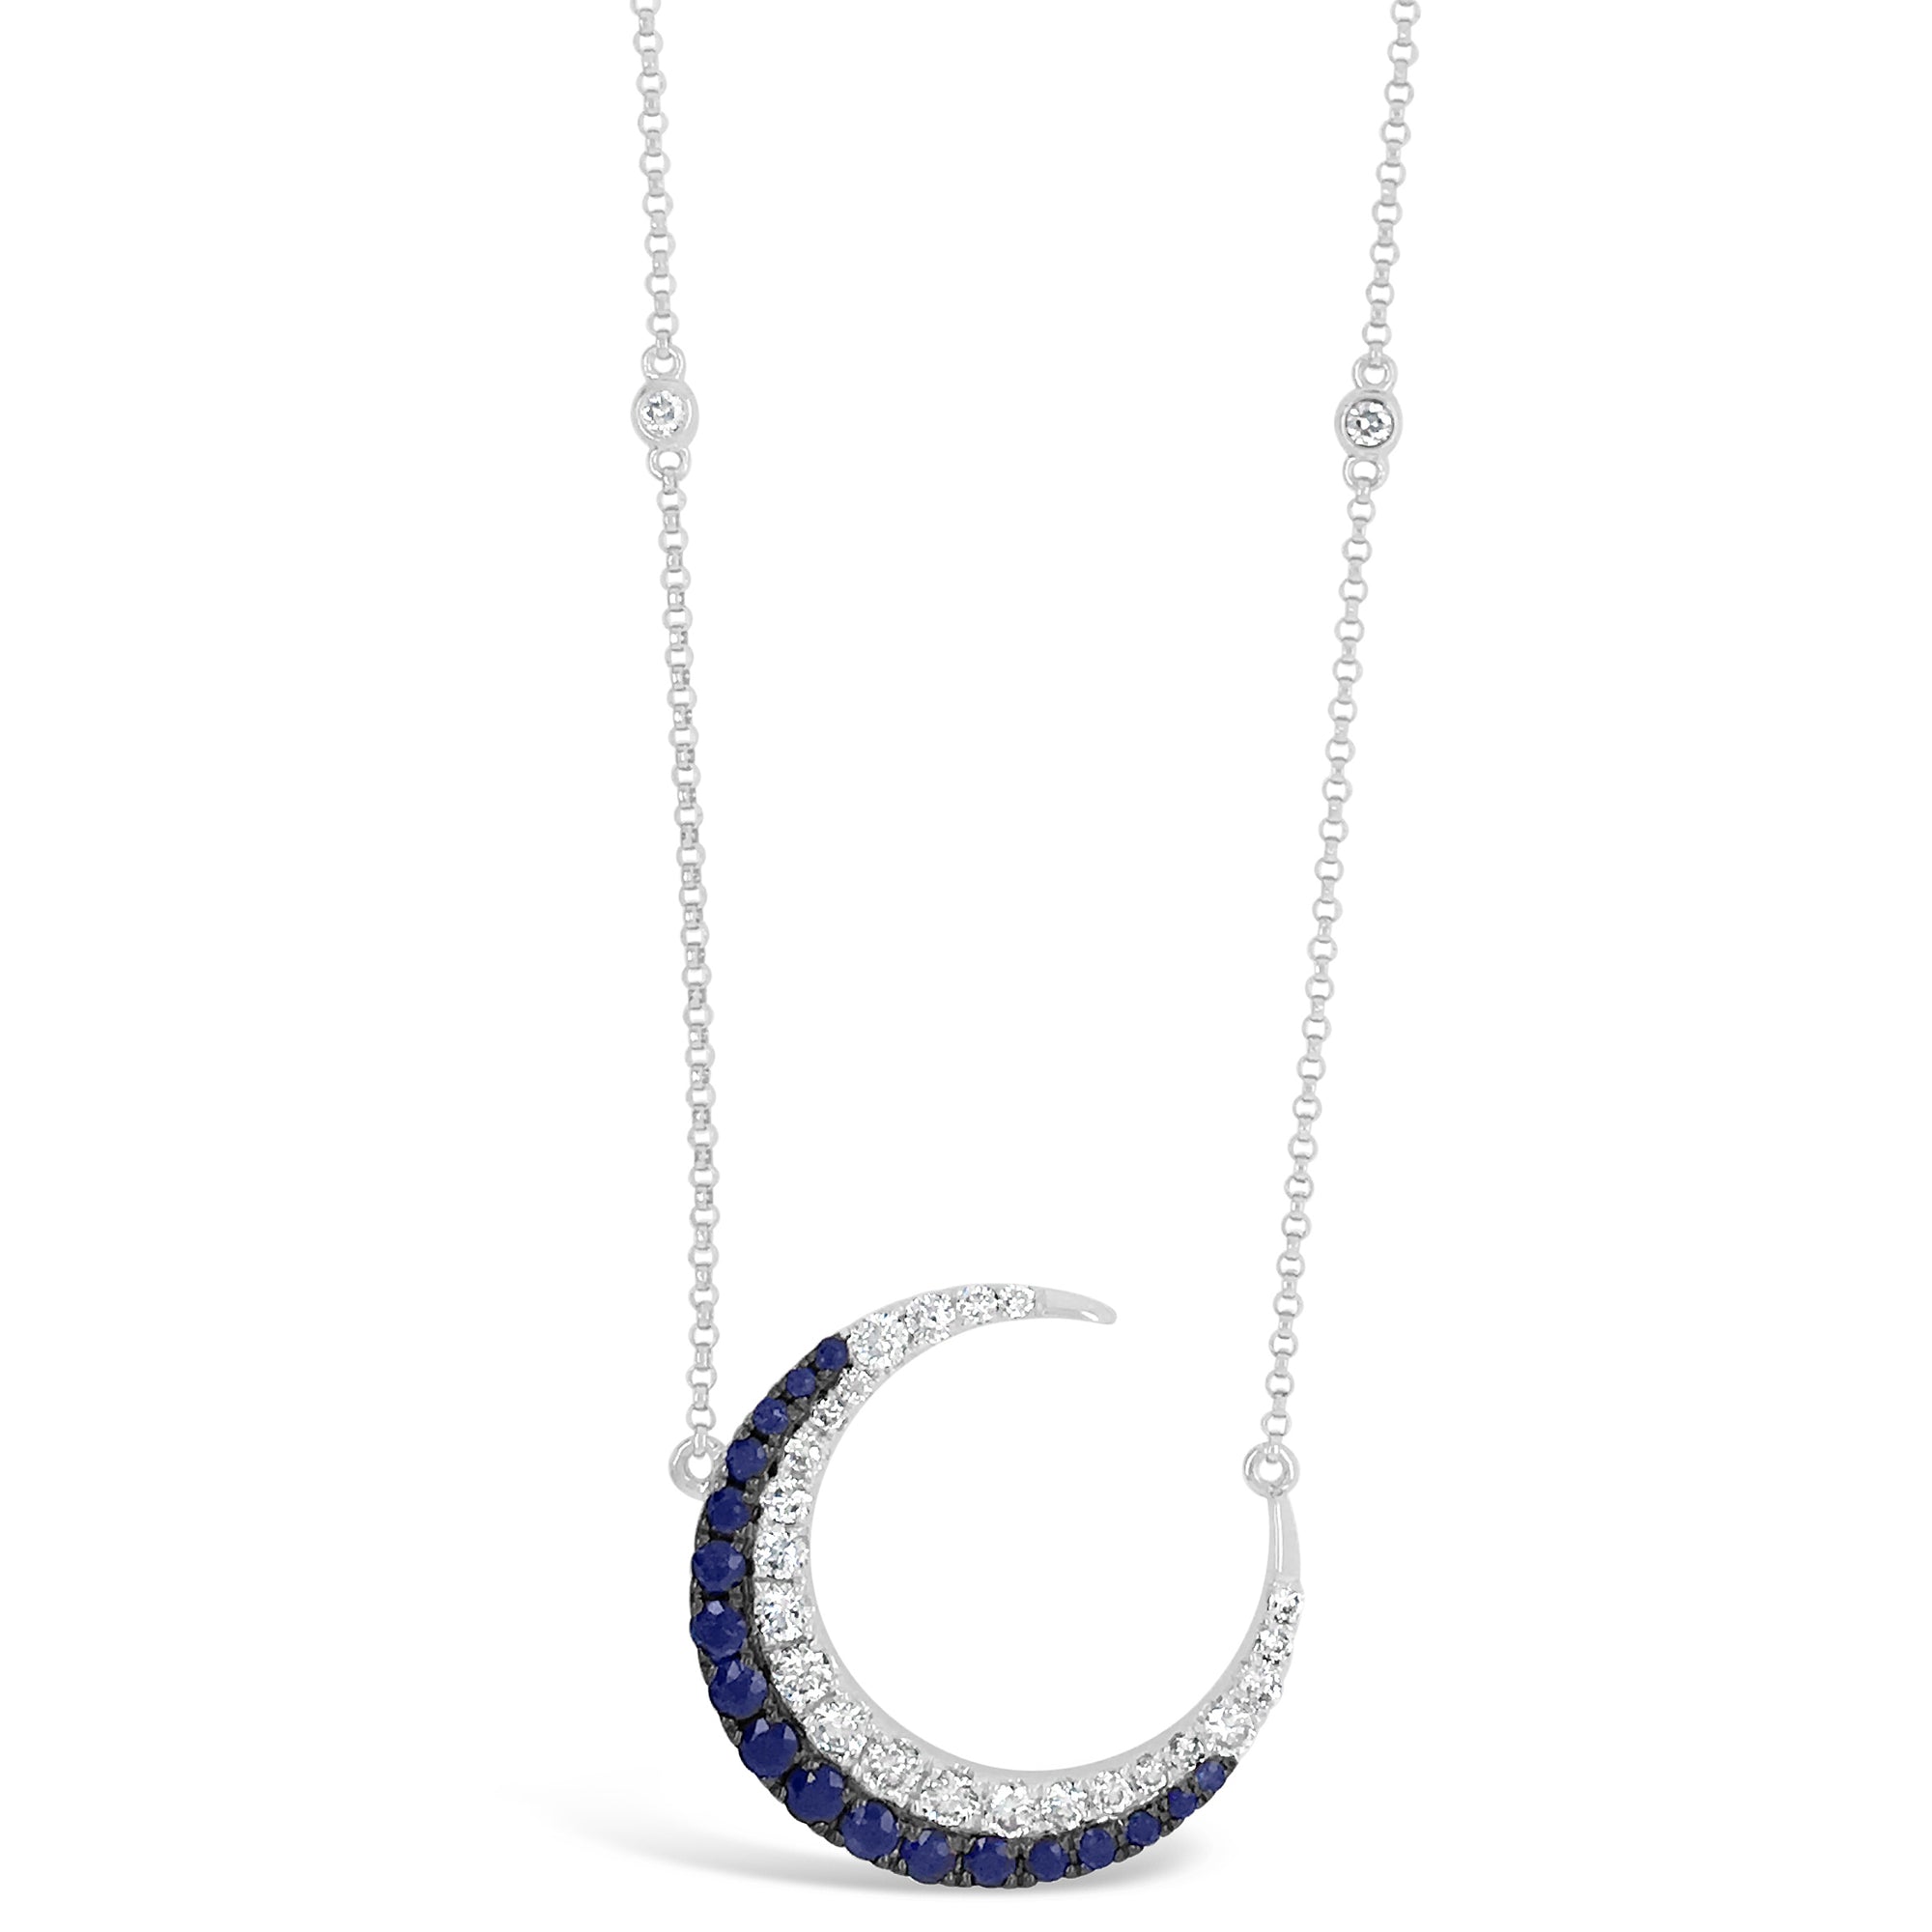 Sapphire & Diamond Crescent Moon Pendant Necklace  -14K gold weighing 5.60 grams  -27 round diamonds totaling 0.85 carats  -18 sapphires totaling 0.80 carats